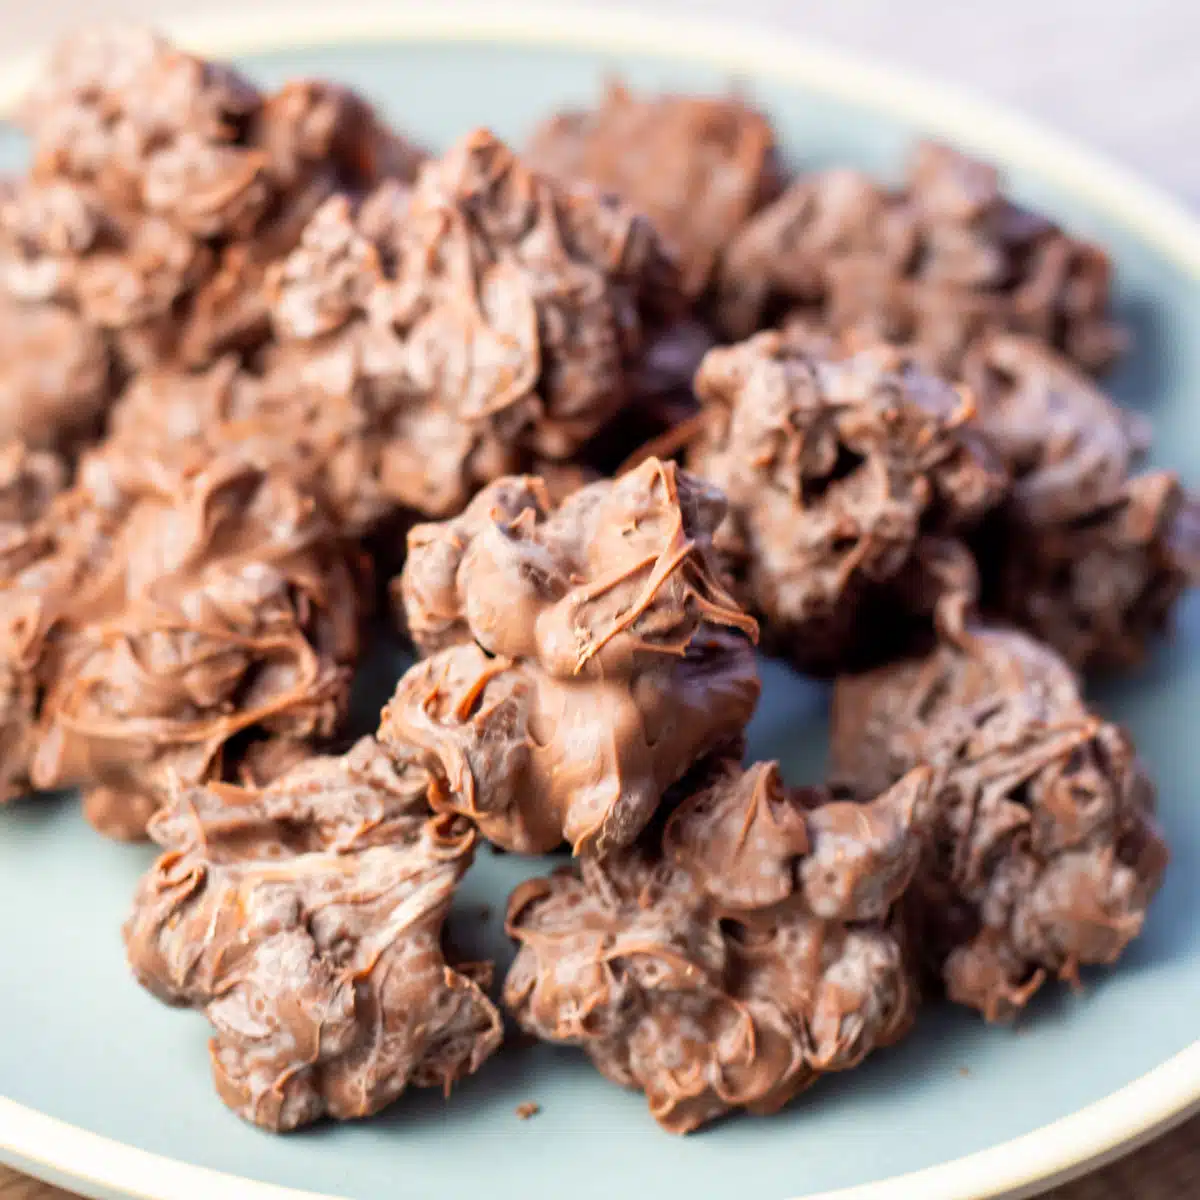 Square image of chocolate raisin candy clusters on a blue plate.